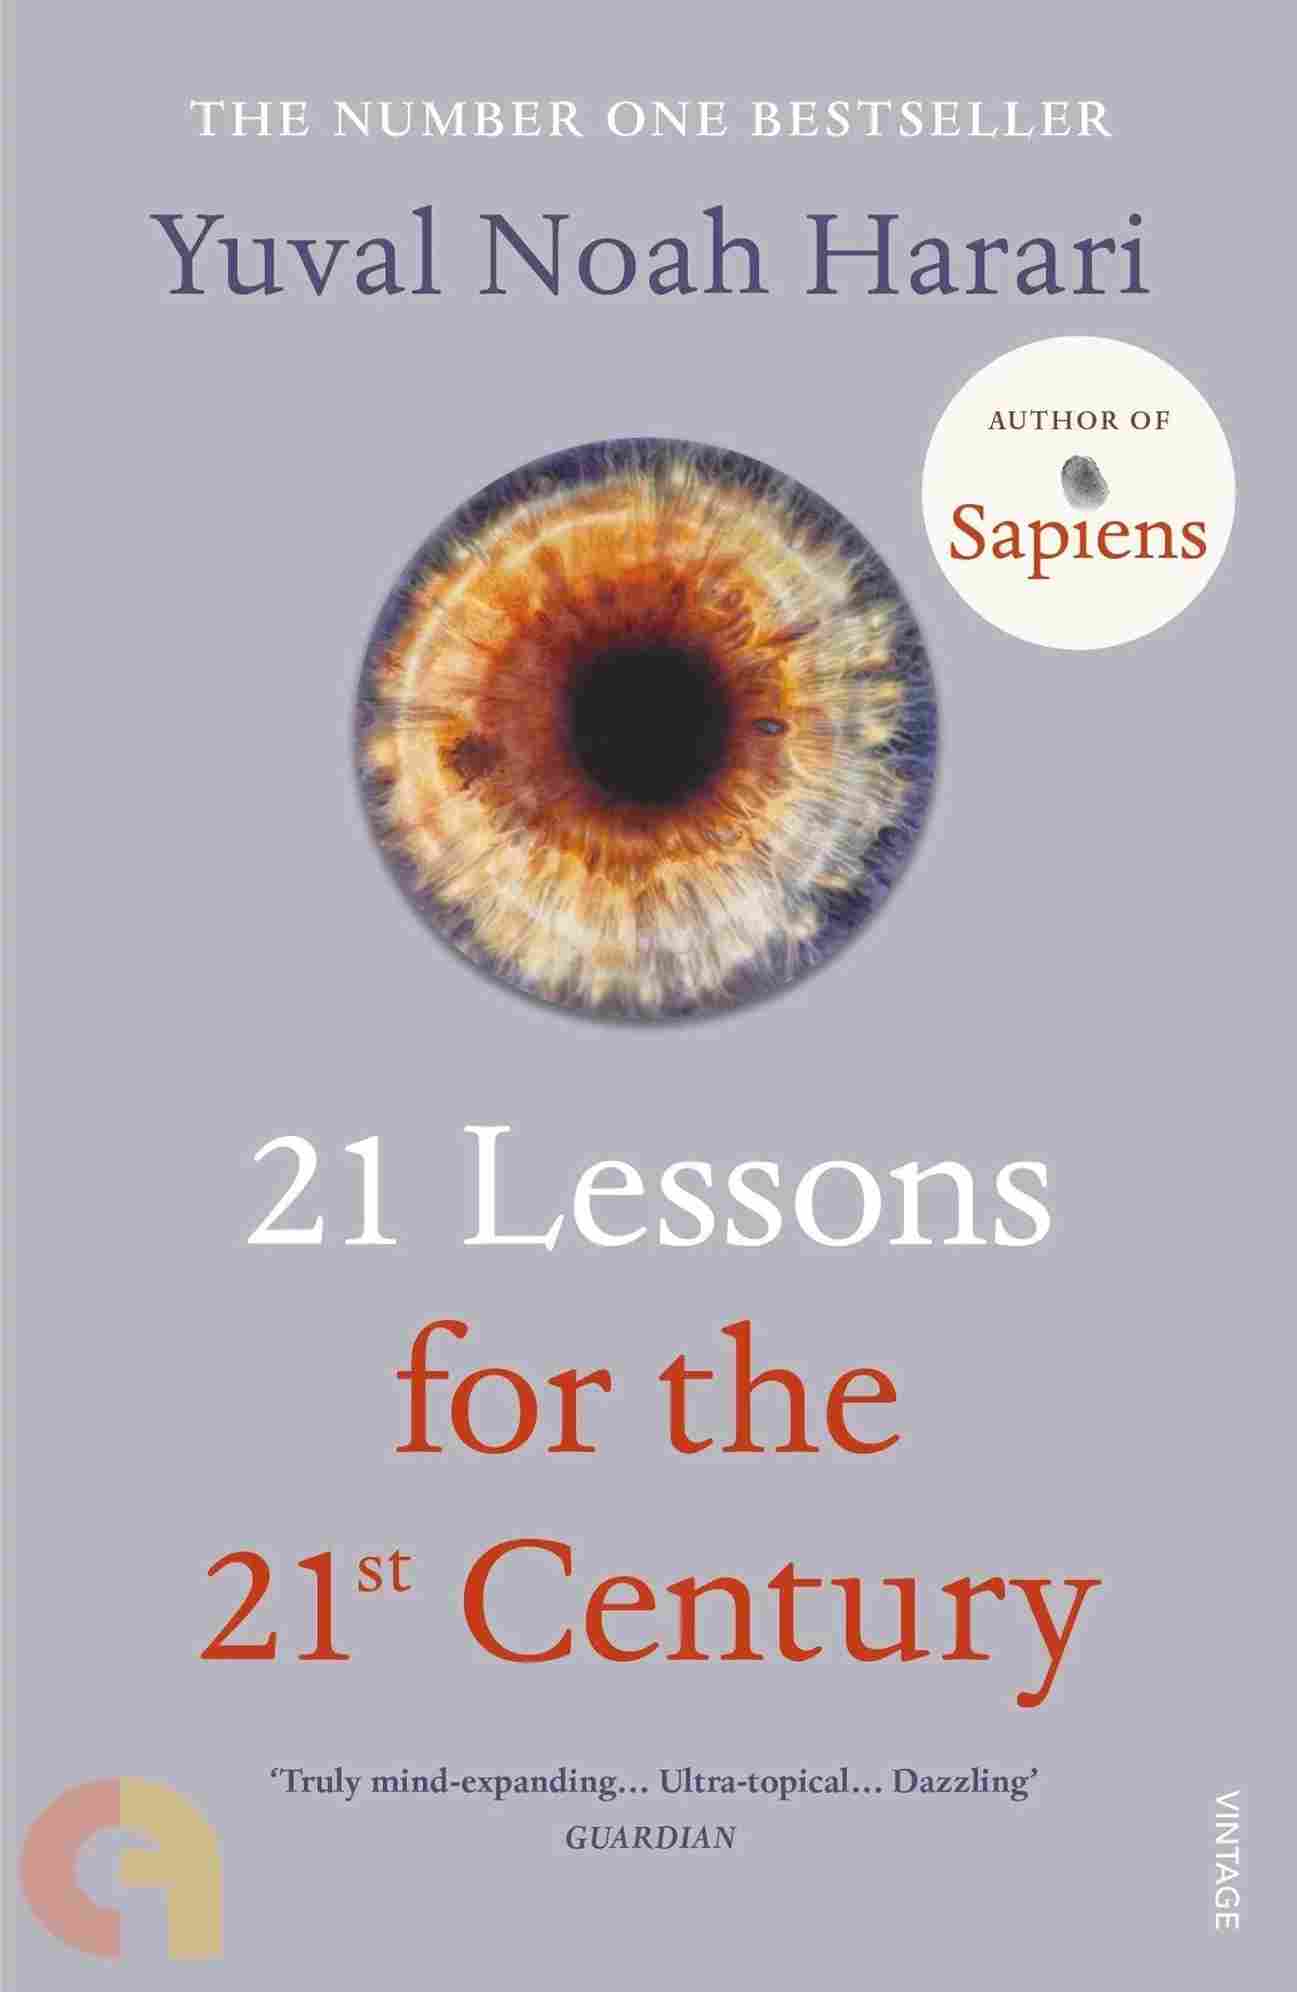 21 Lessons for 21st Century- (Paperback) by Yuval Noah Harari - 99BooksStore